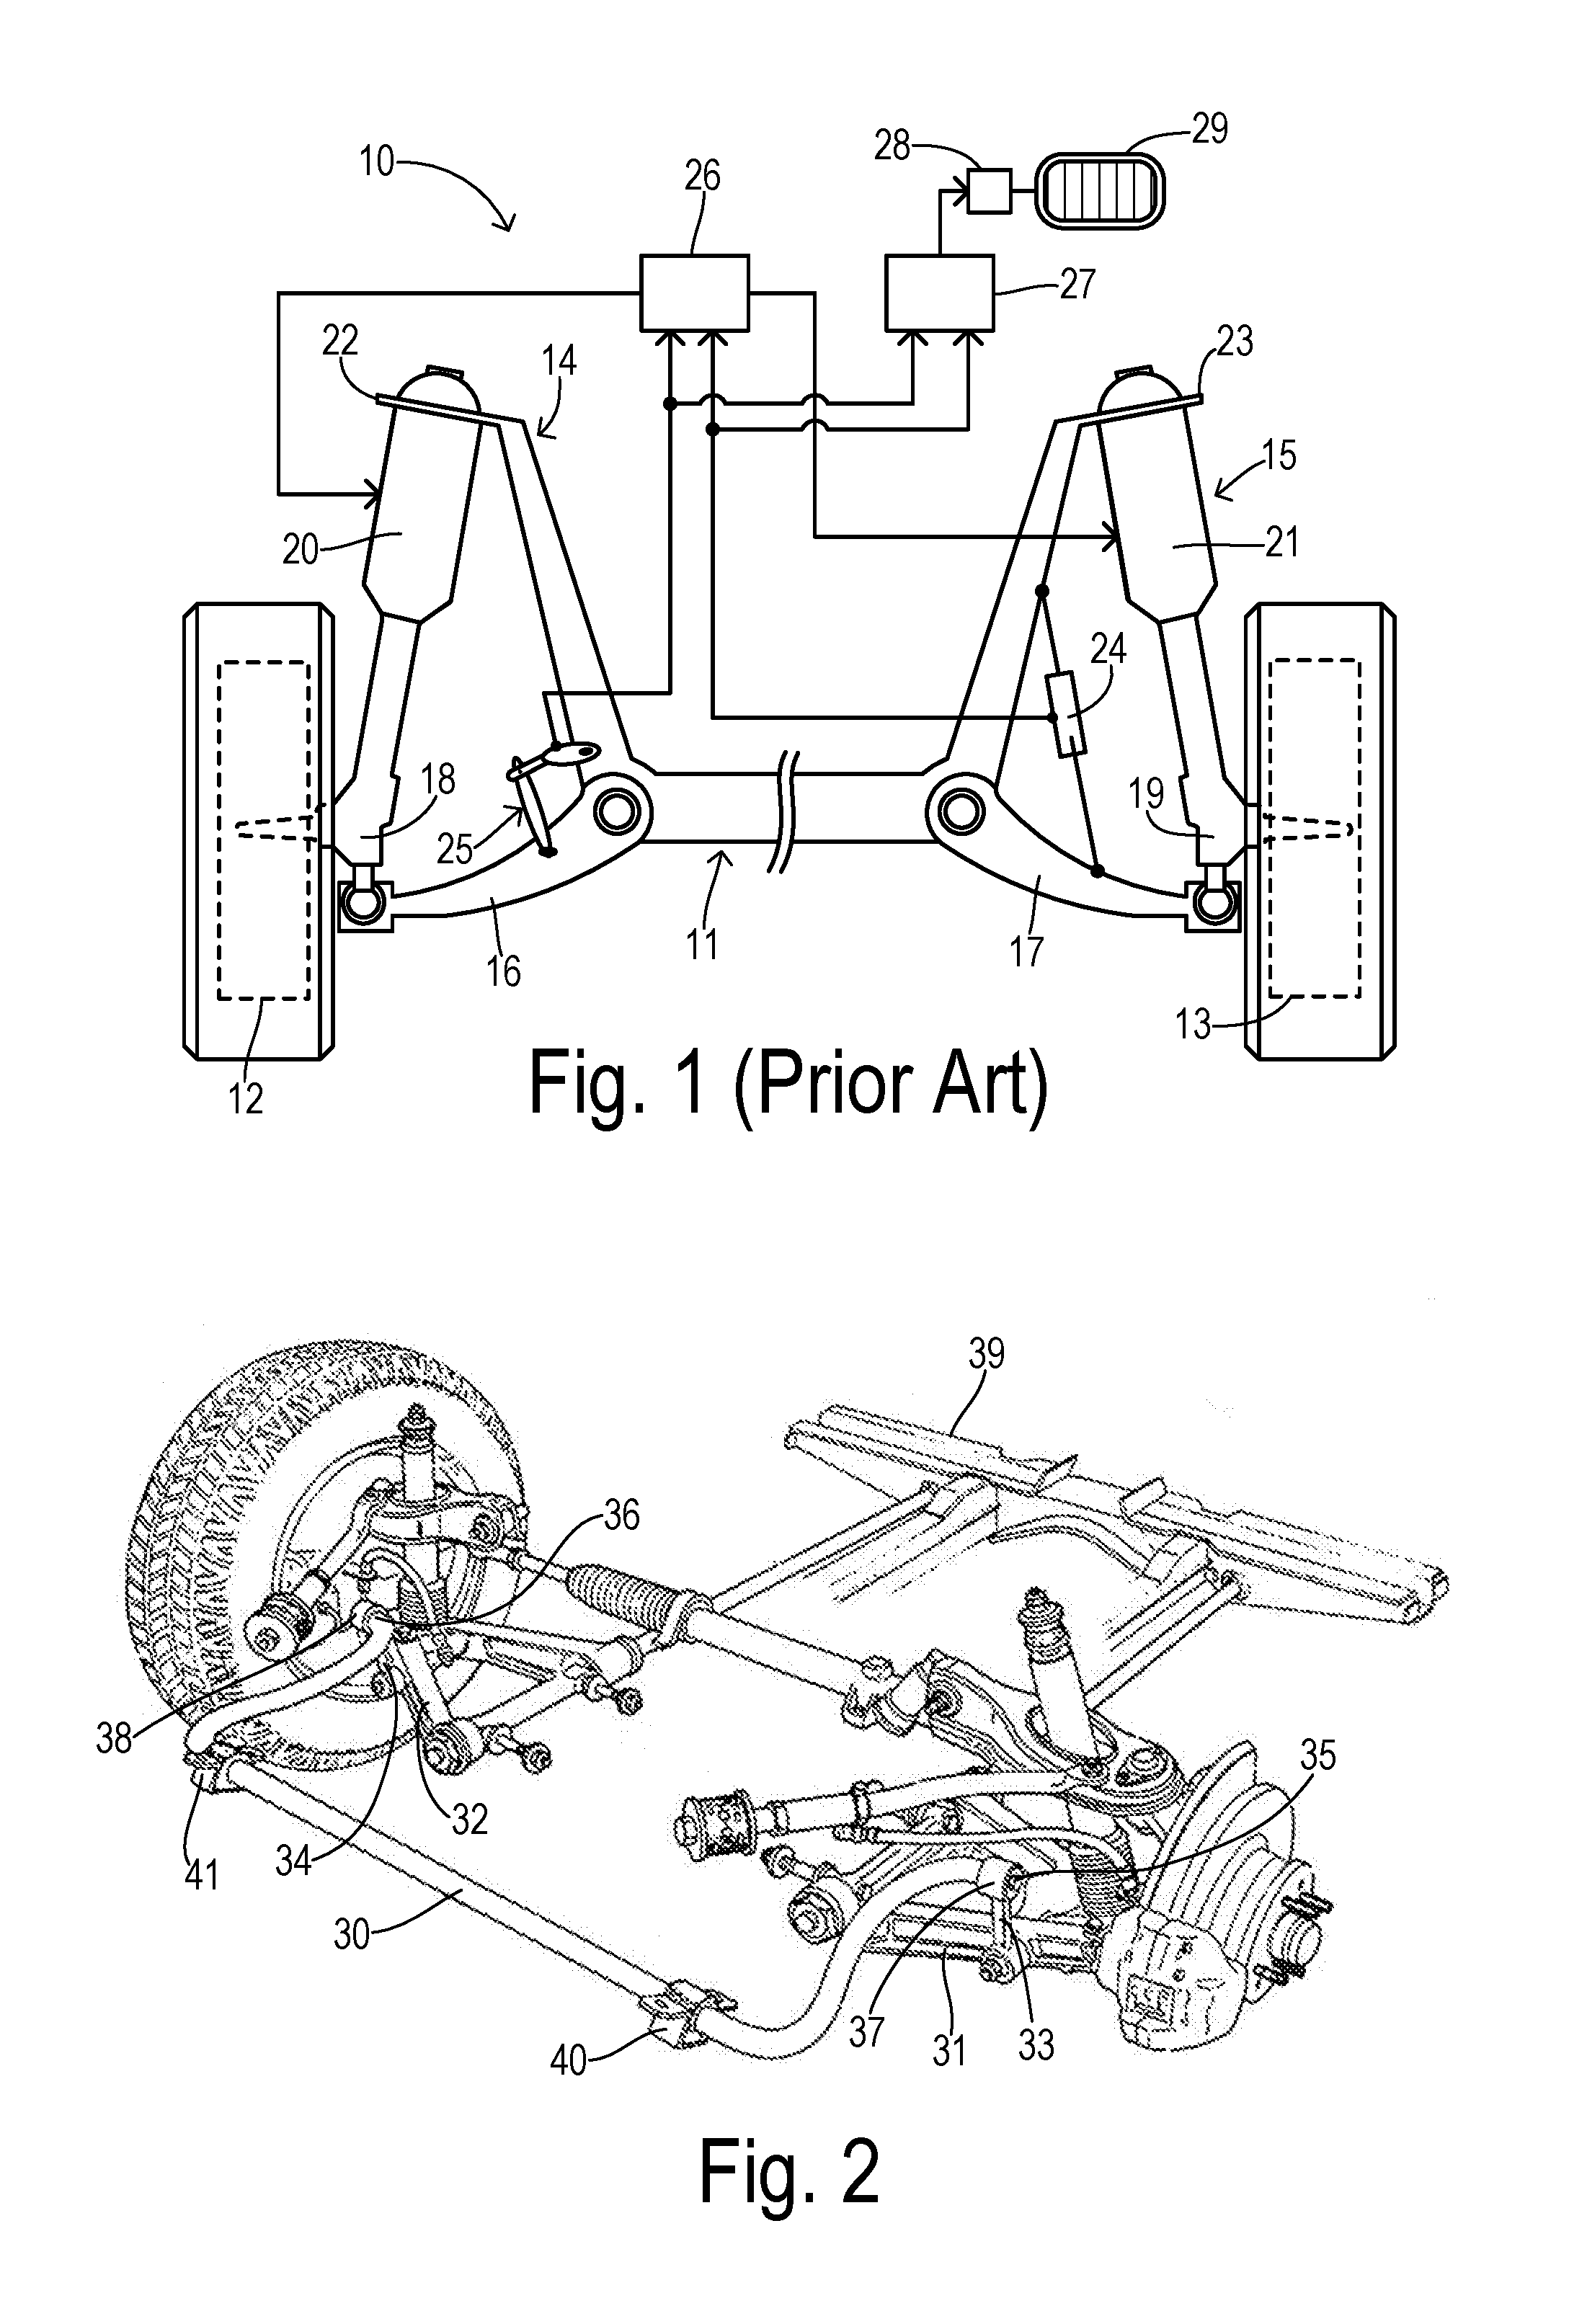 Height determination for two independently suspended wheels using a height sensor for only one wheel